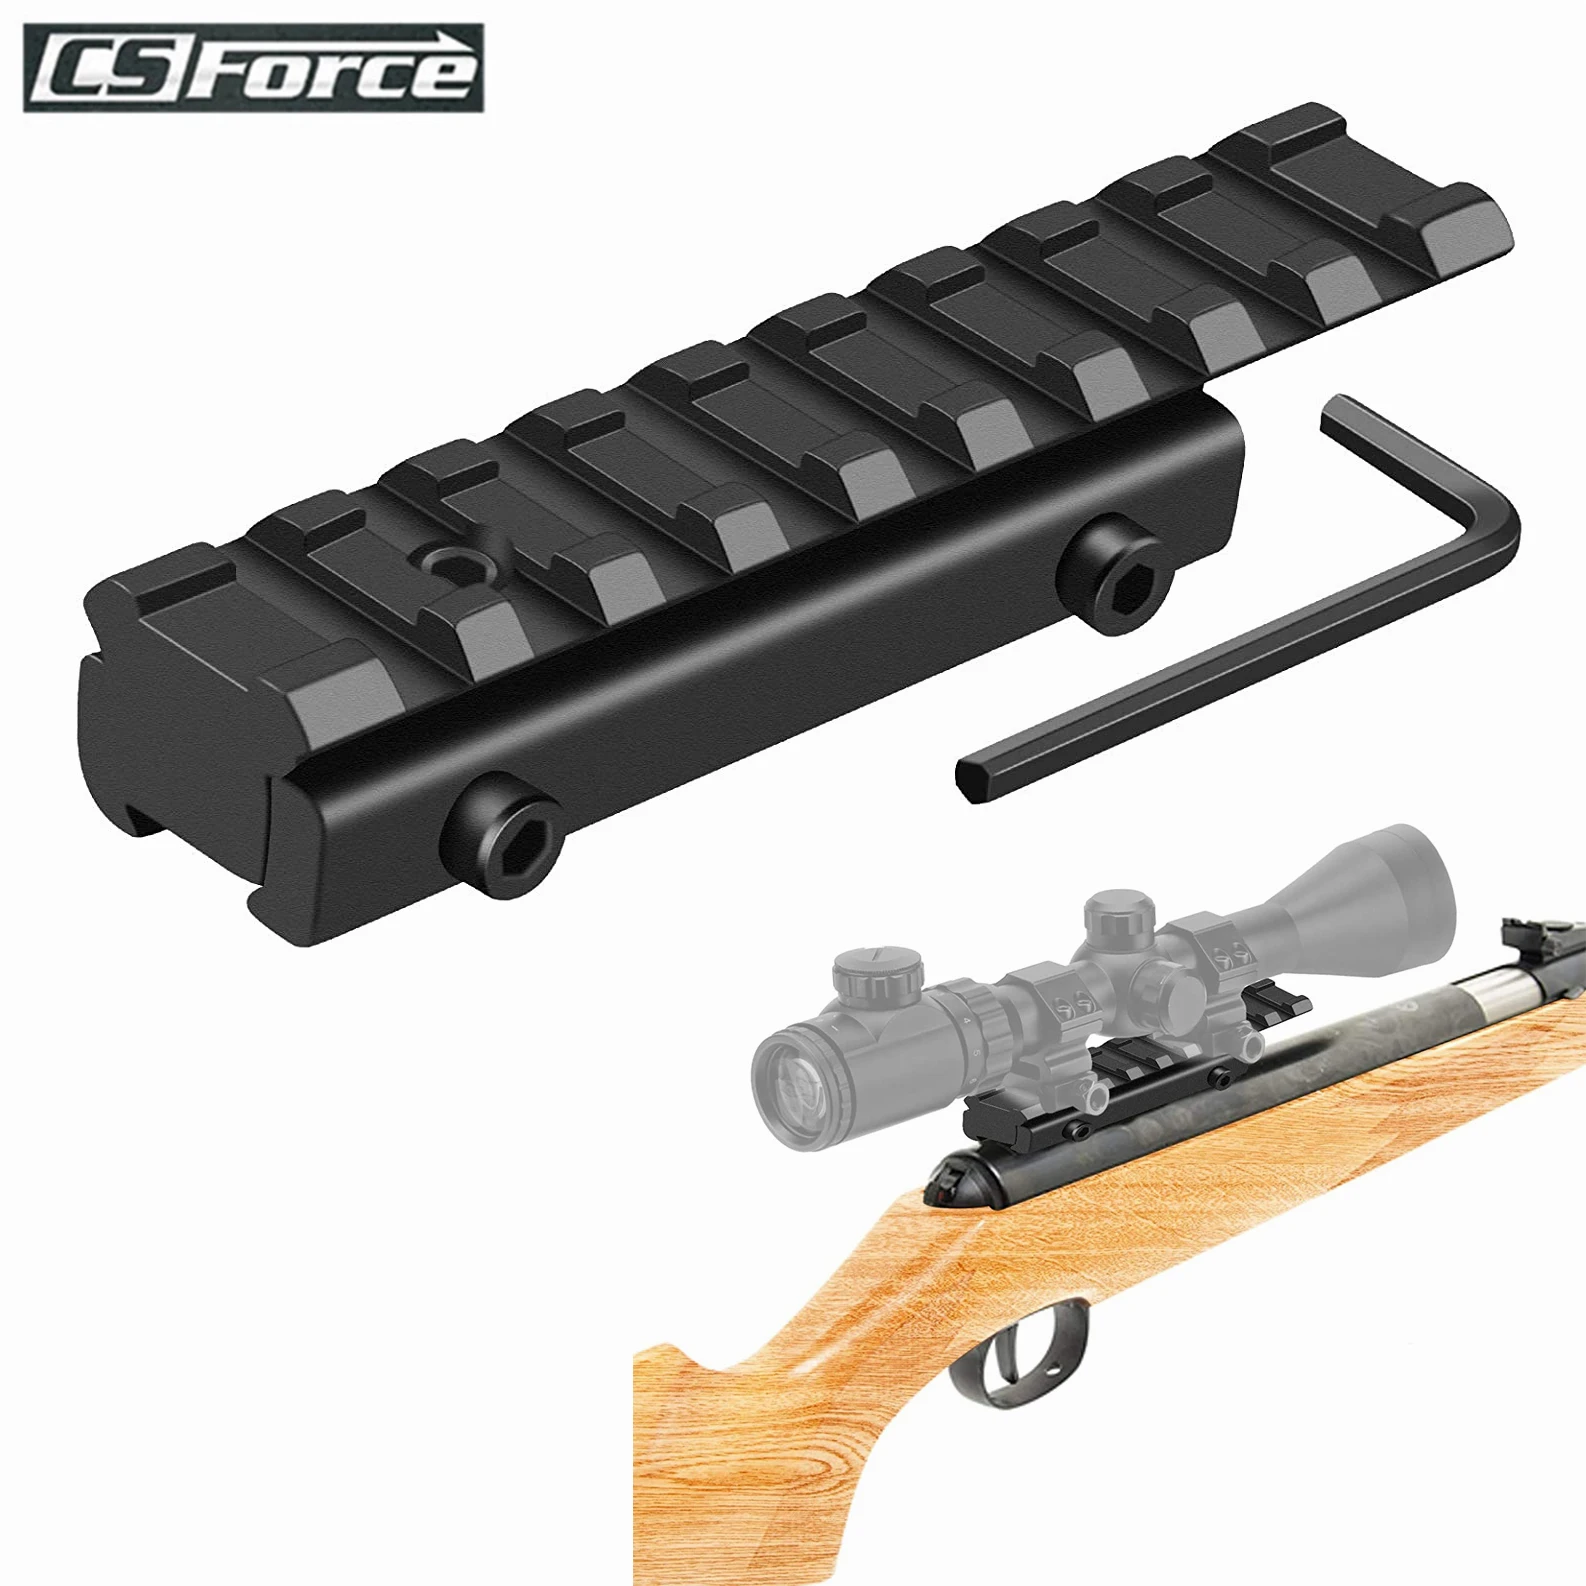 

11mm Dovetail to 21mm Picatinny Weaver Rail Convert Mount Adapter Low Profile Scope Mount Riser Rail Base Hunting Gun Accessory